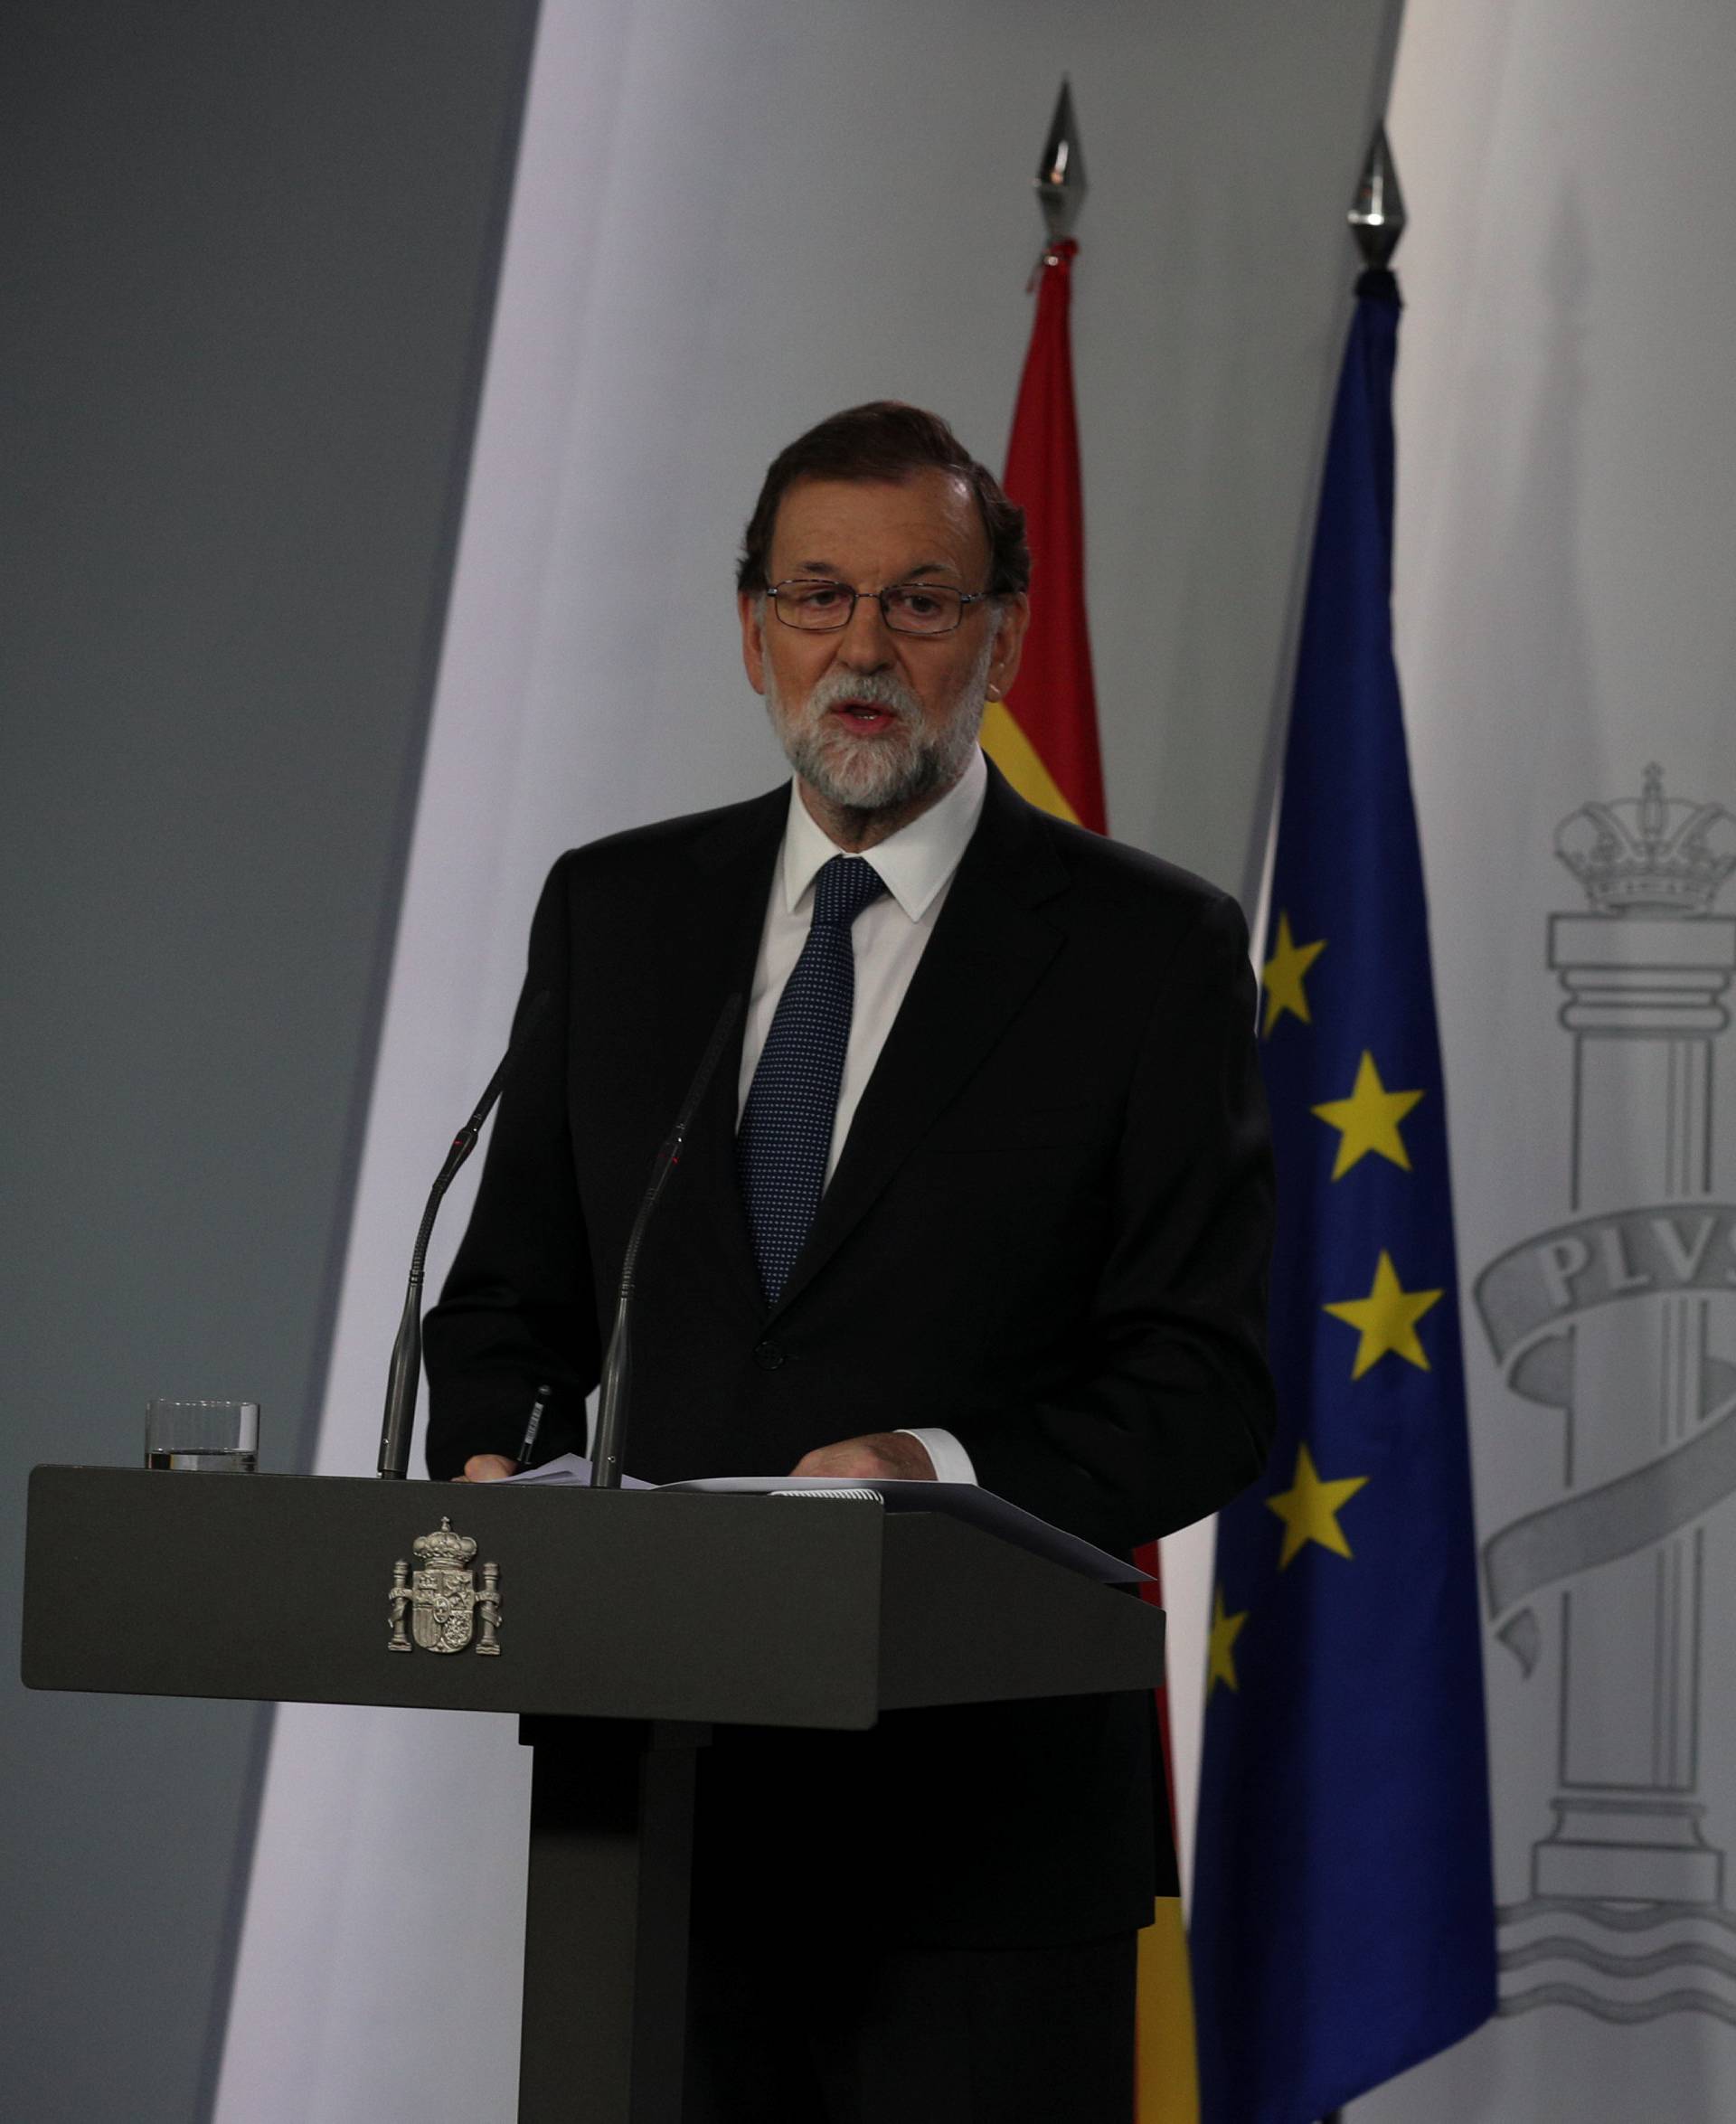 Spain's PM Rajoy delivers a statement at the Moncloa Palace in Madrid